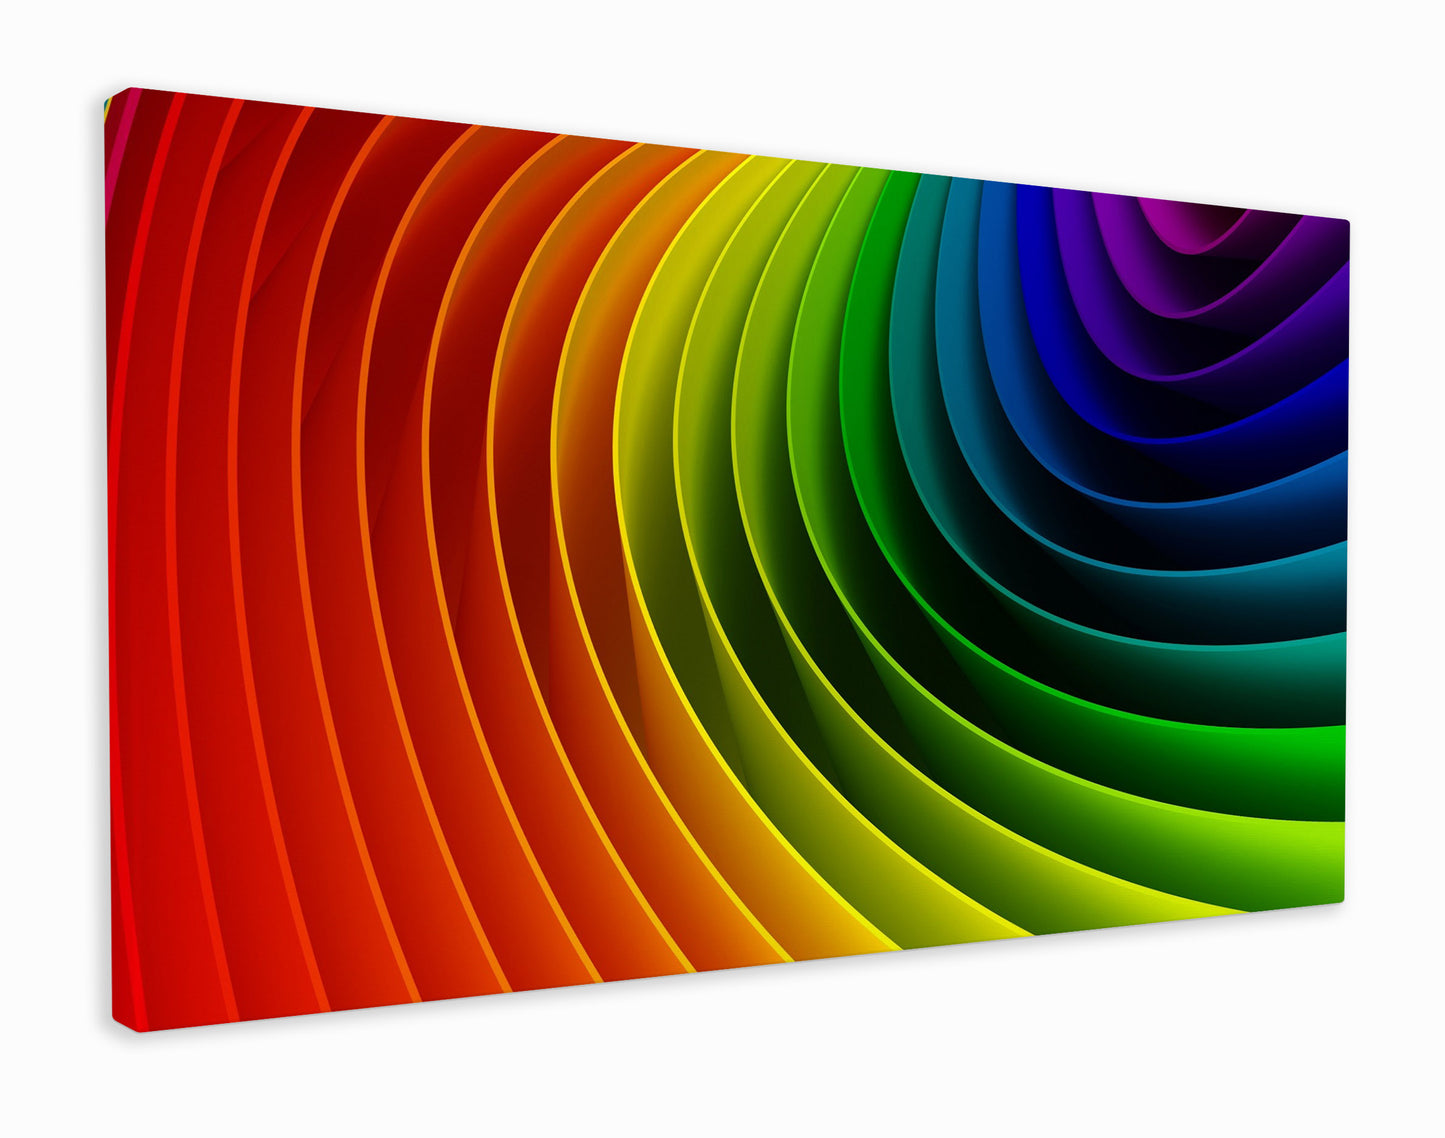 The colours of a rainbow swirl